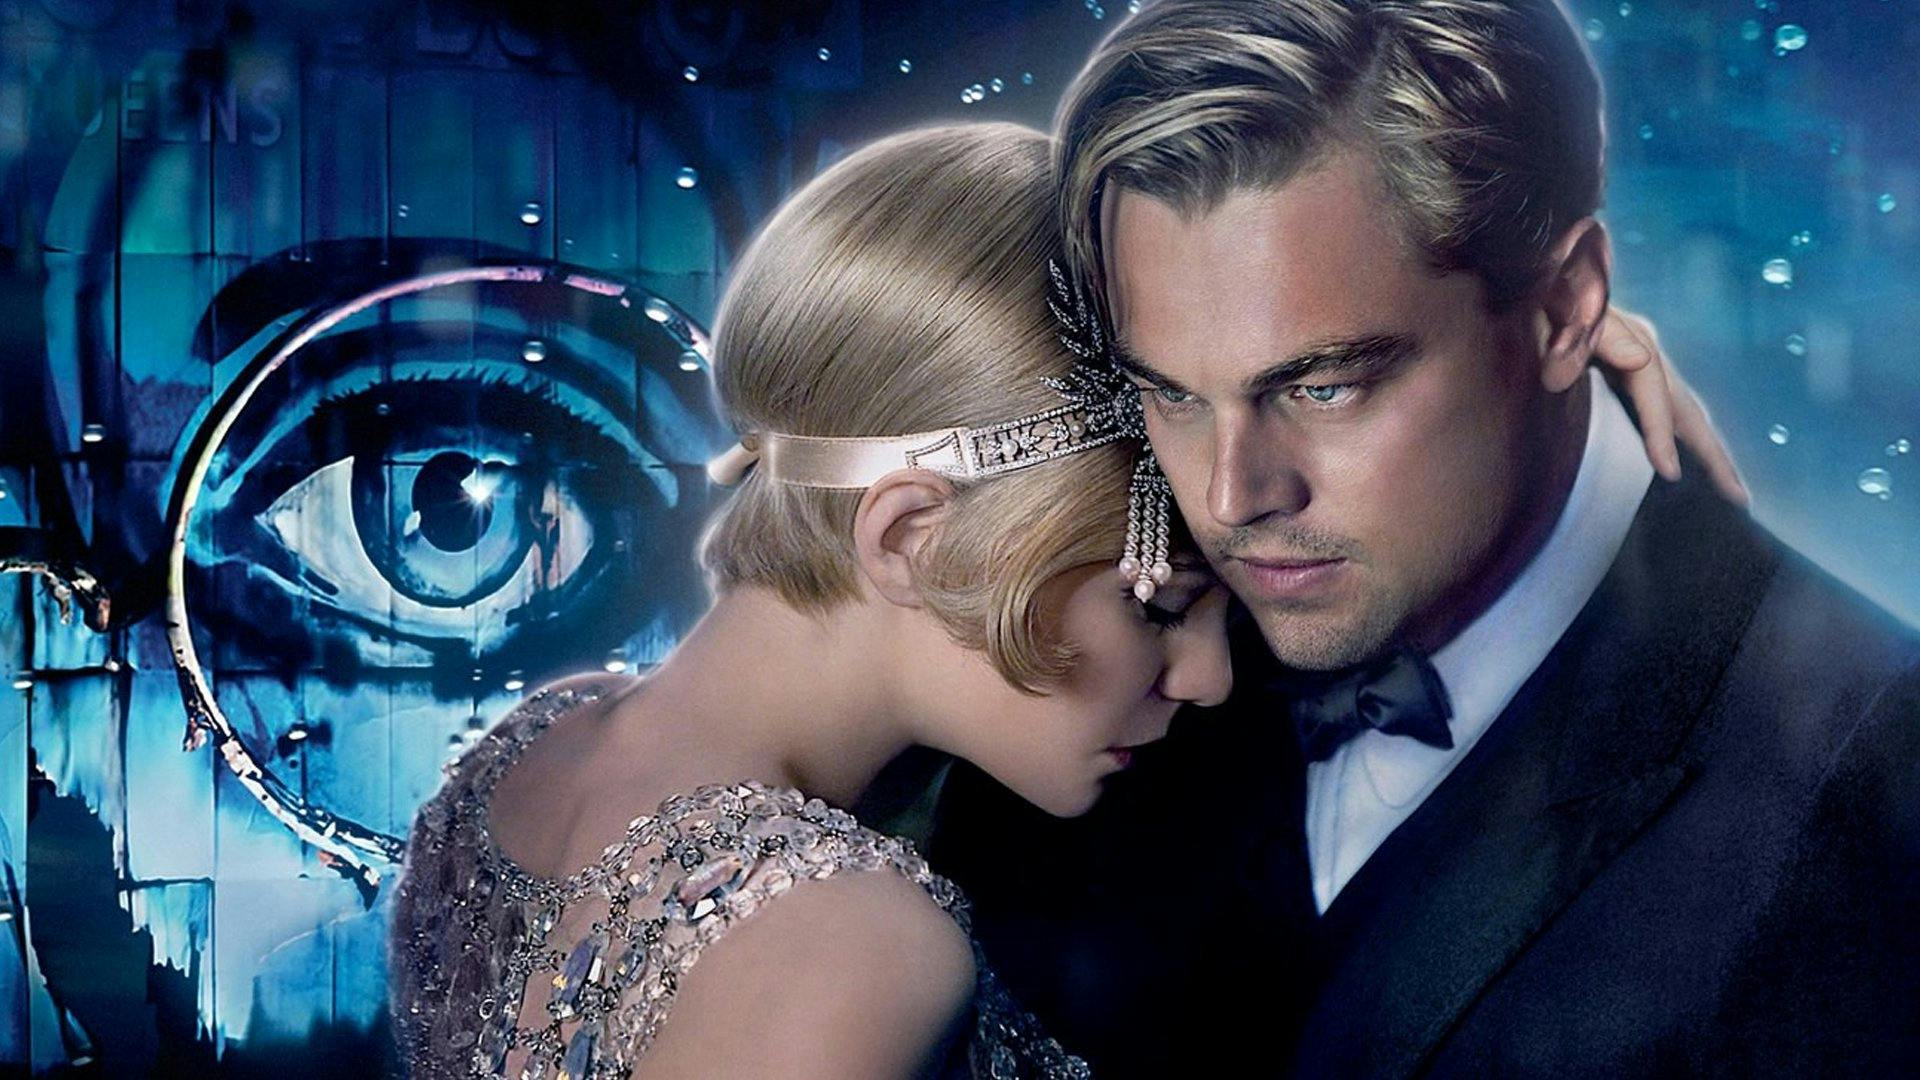 The Great Gatsby Review | Movie - Empire